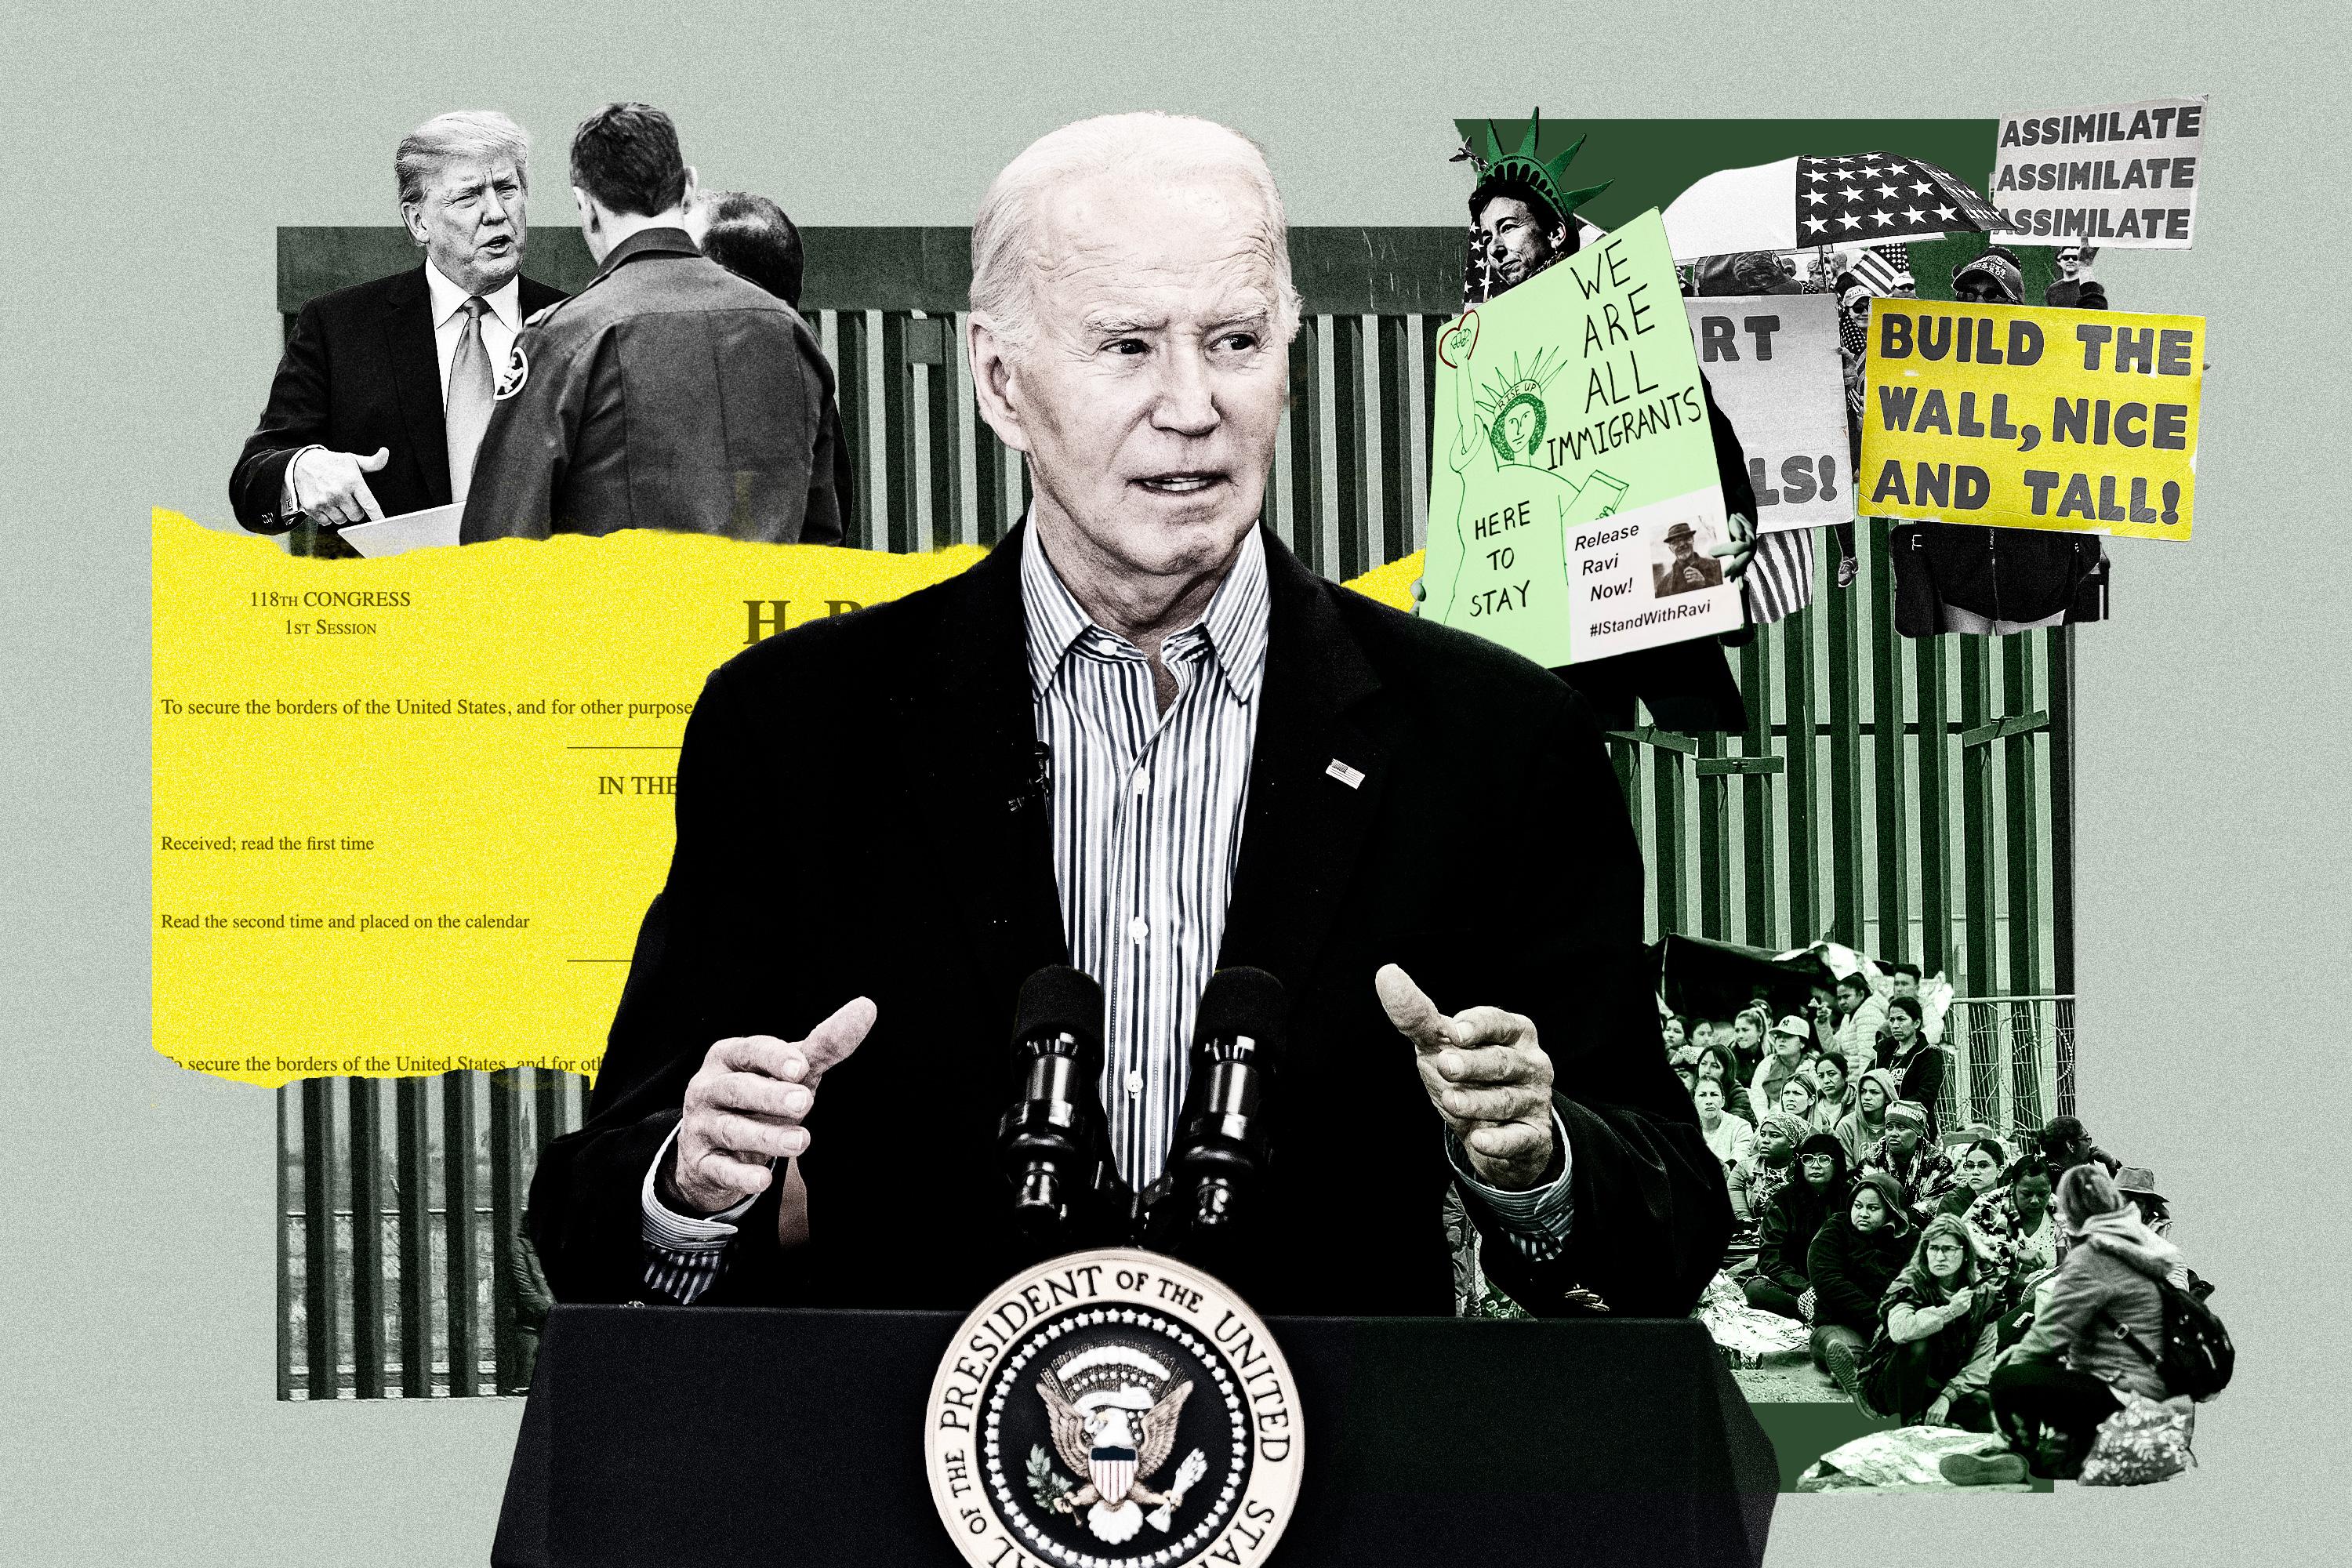 Biden Blames Trump for Derailing the Border Deal. But Are Voters Buying It?